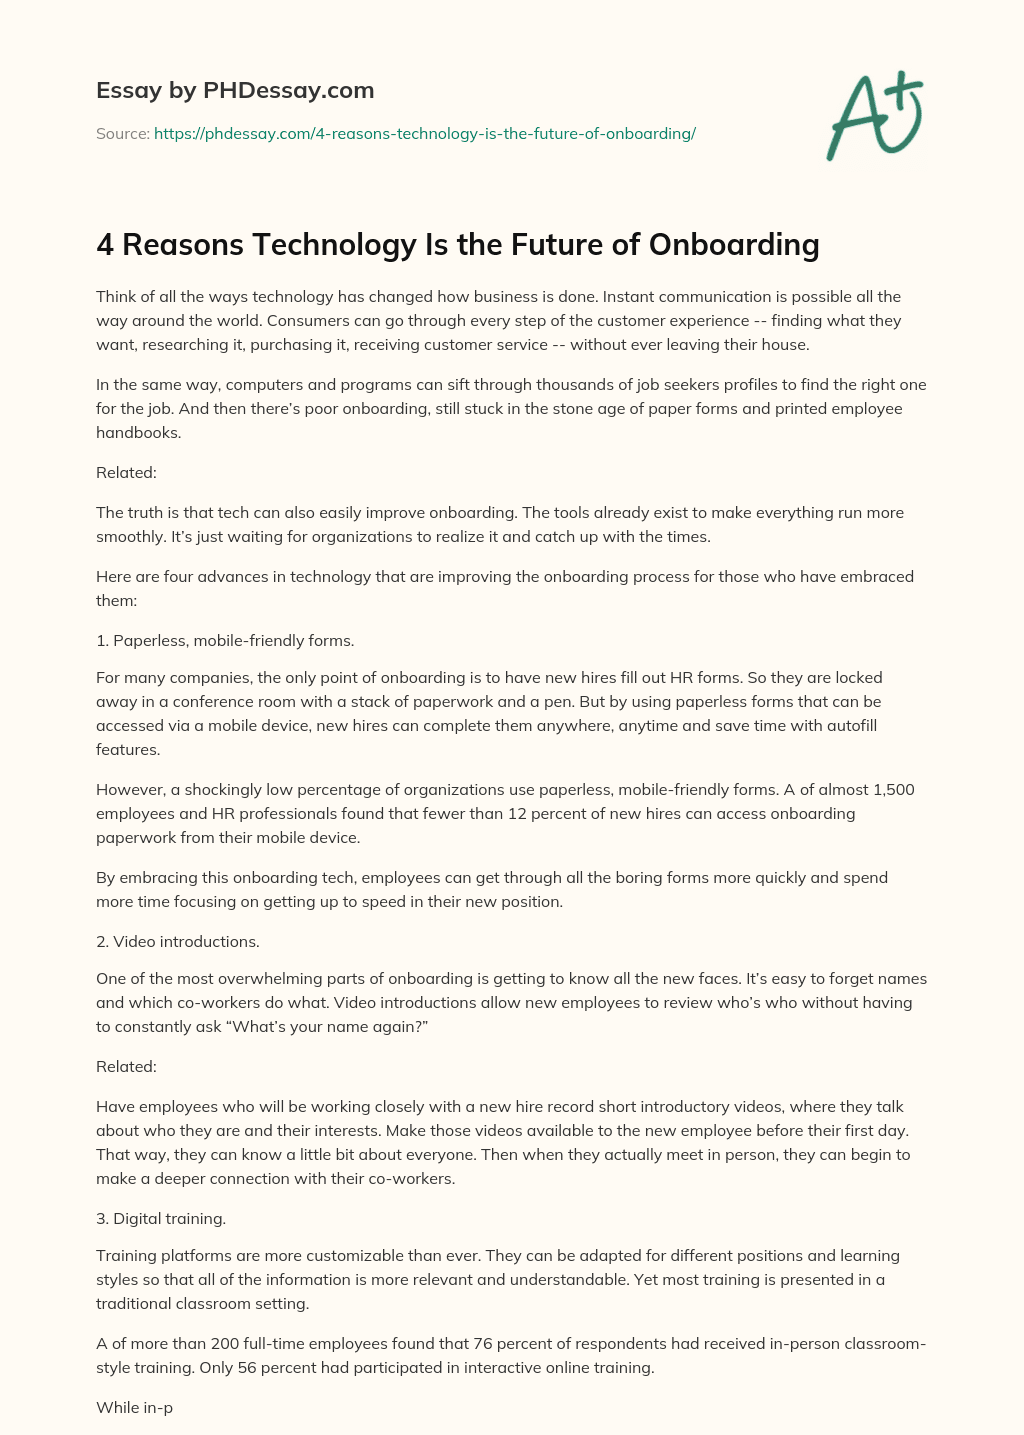 4 Reasons Technology Is the Future of Onboarding essay